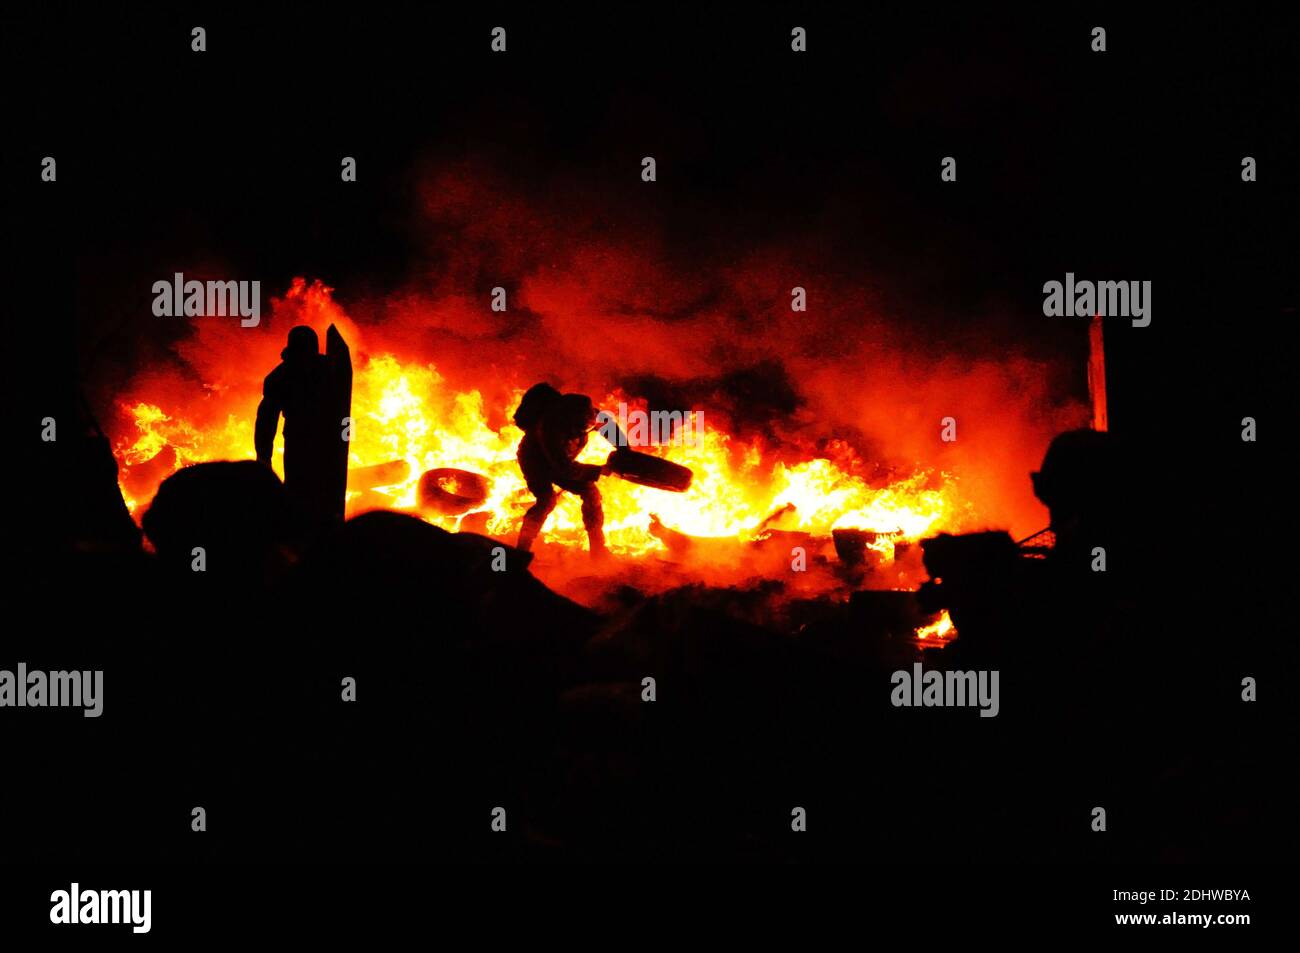 Ukrainian crisis.Protester refugee is burning tires to stop the riot police. Street fights in Kyiv, Ukraine. Ukraine crisis. Fires of a Revolution. Stock Photo